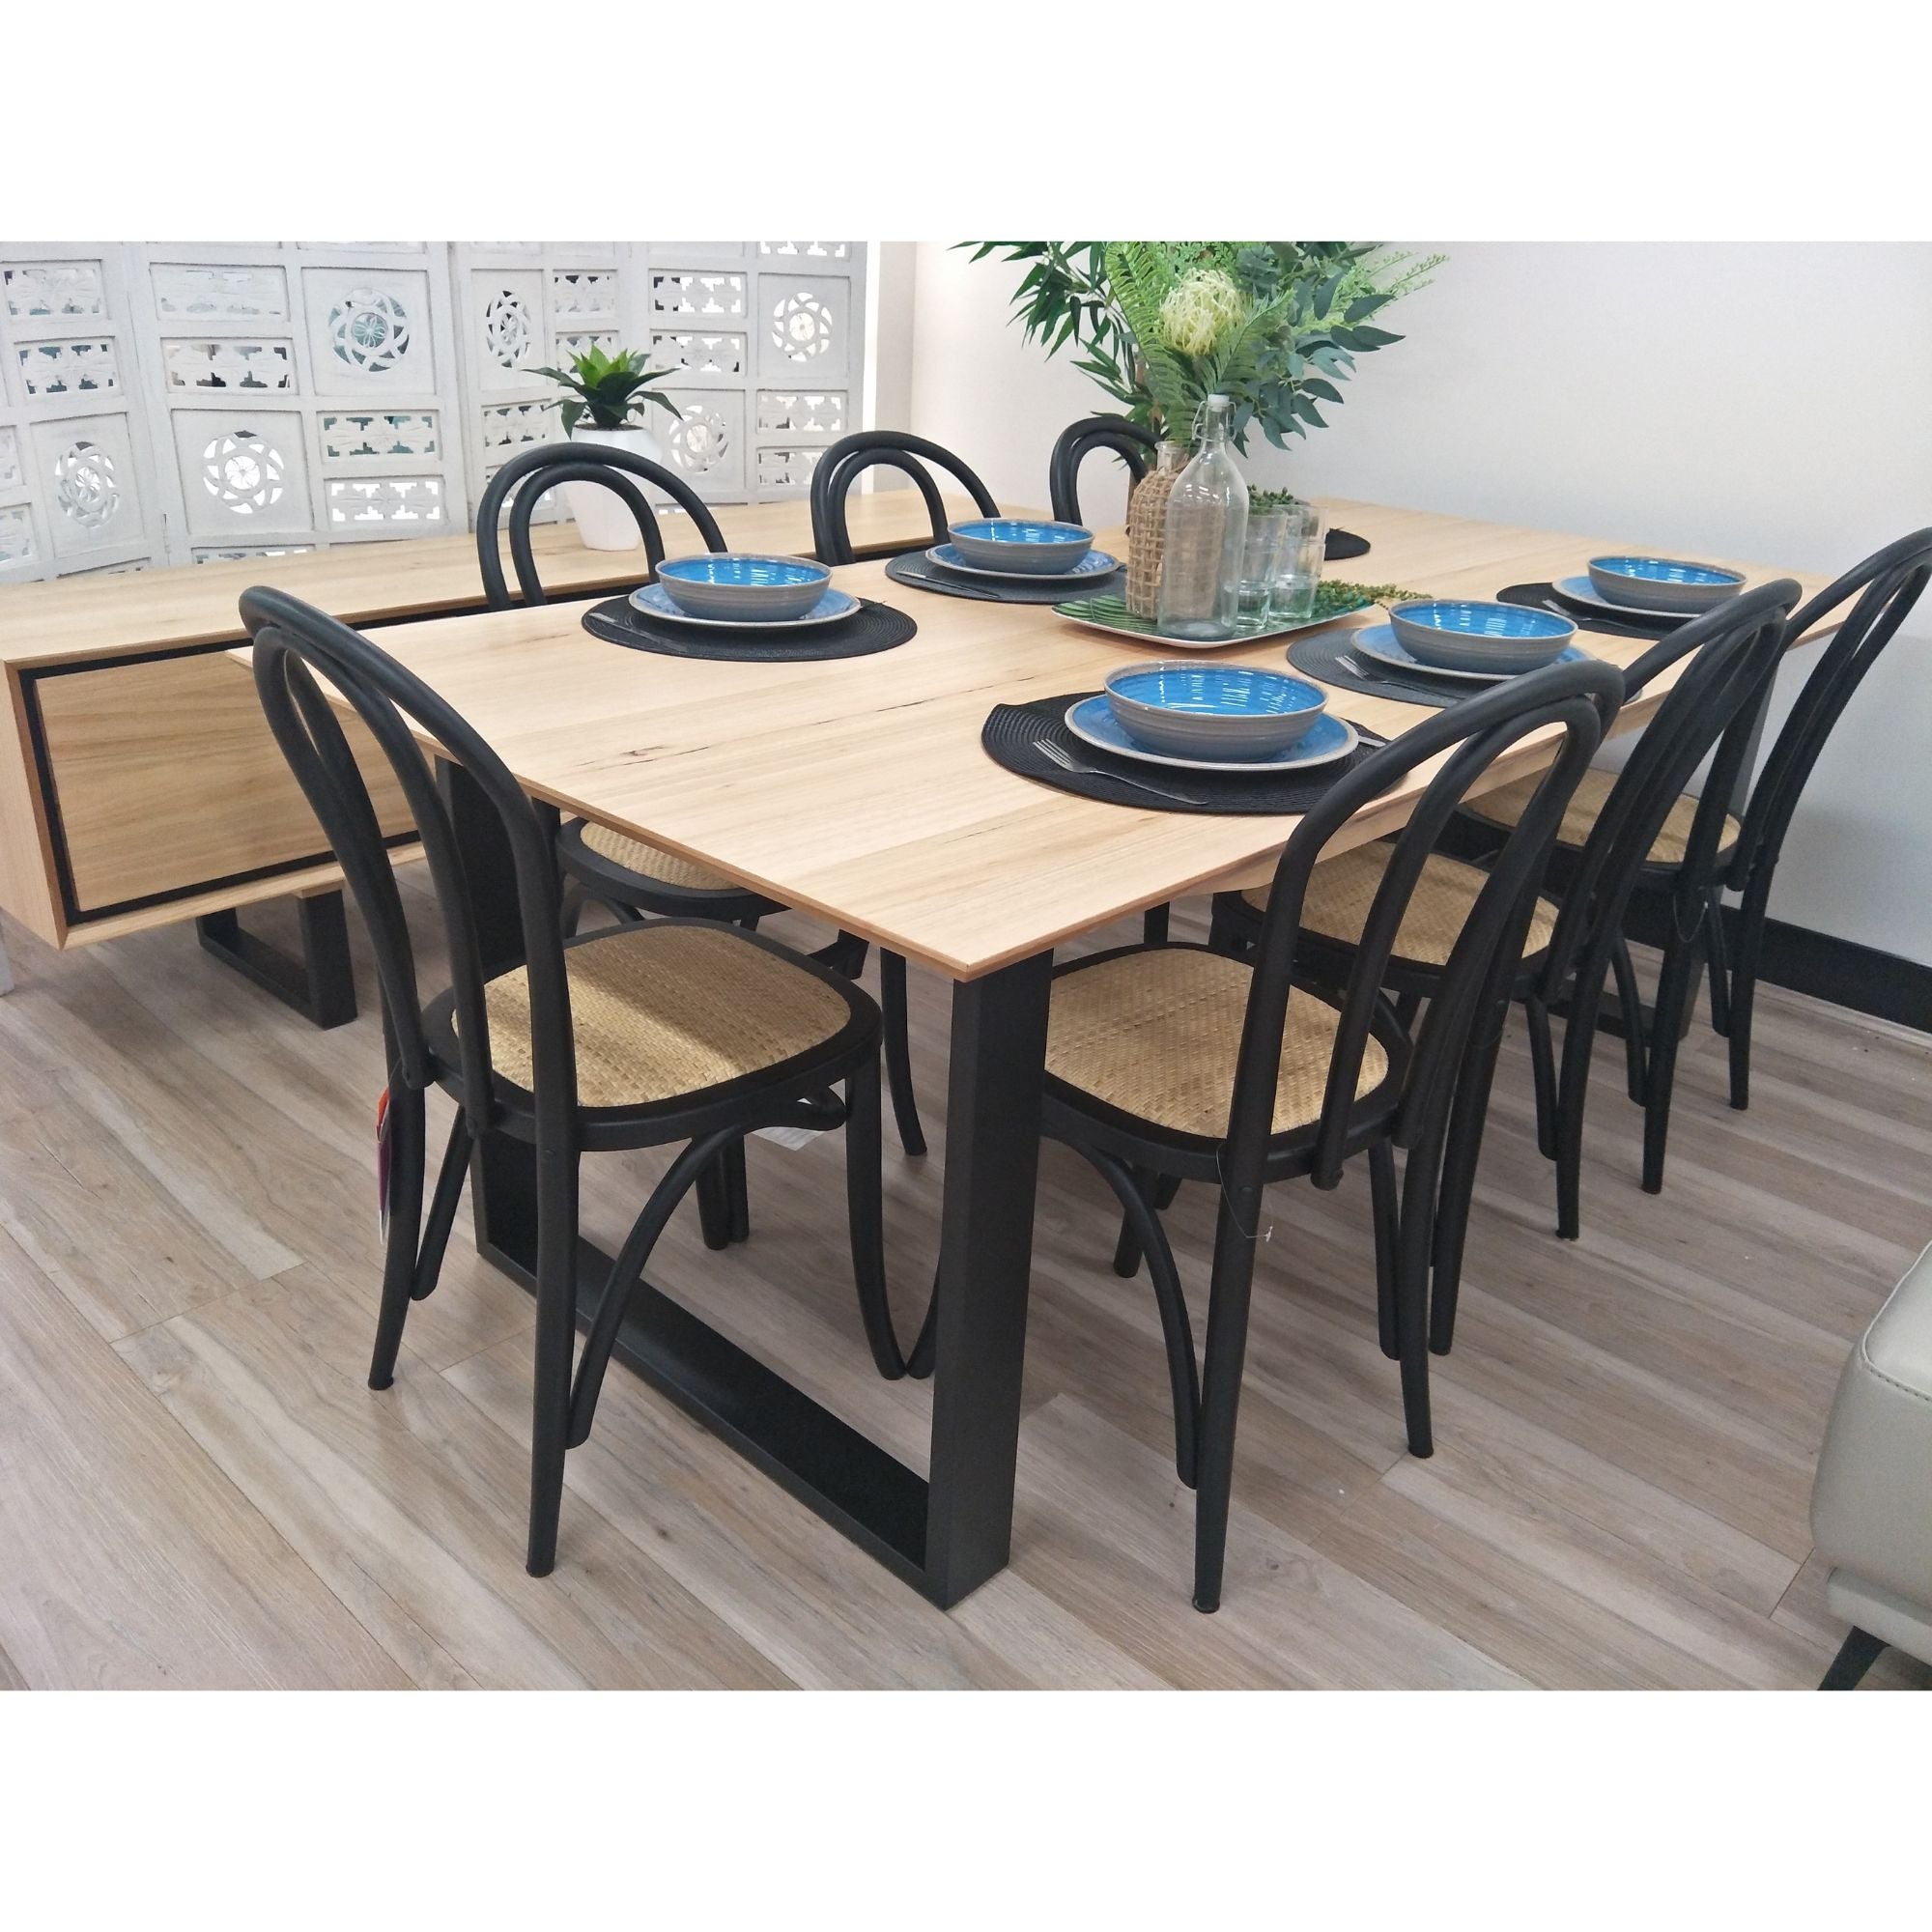 180cm Dining Table Set: 6 Arched Back Chairs and Solid Messmate Timber